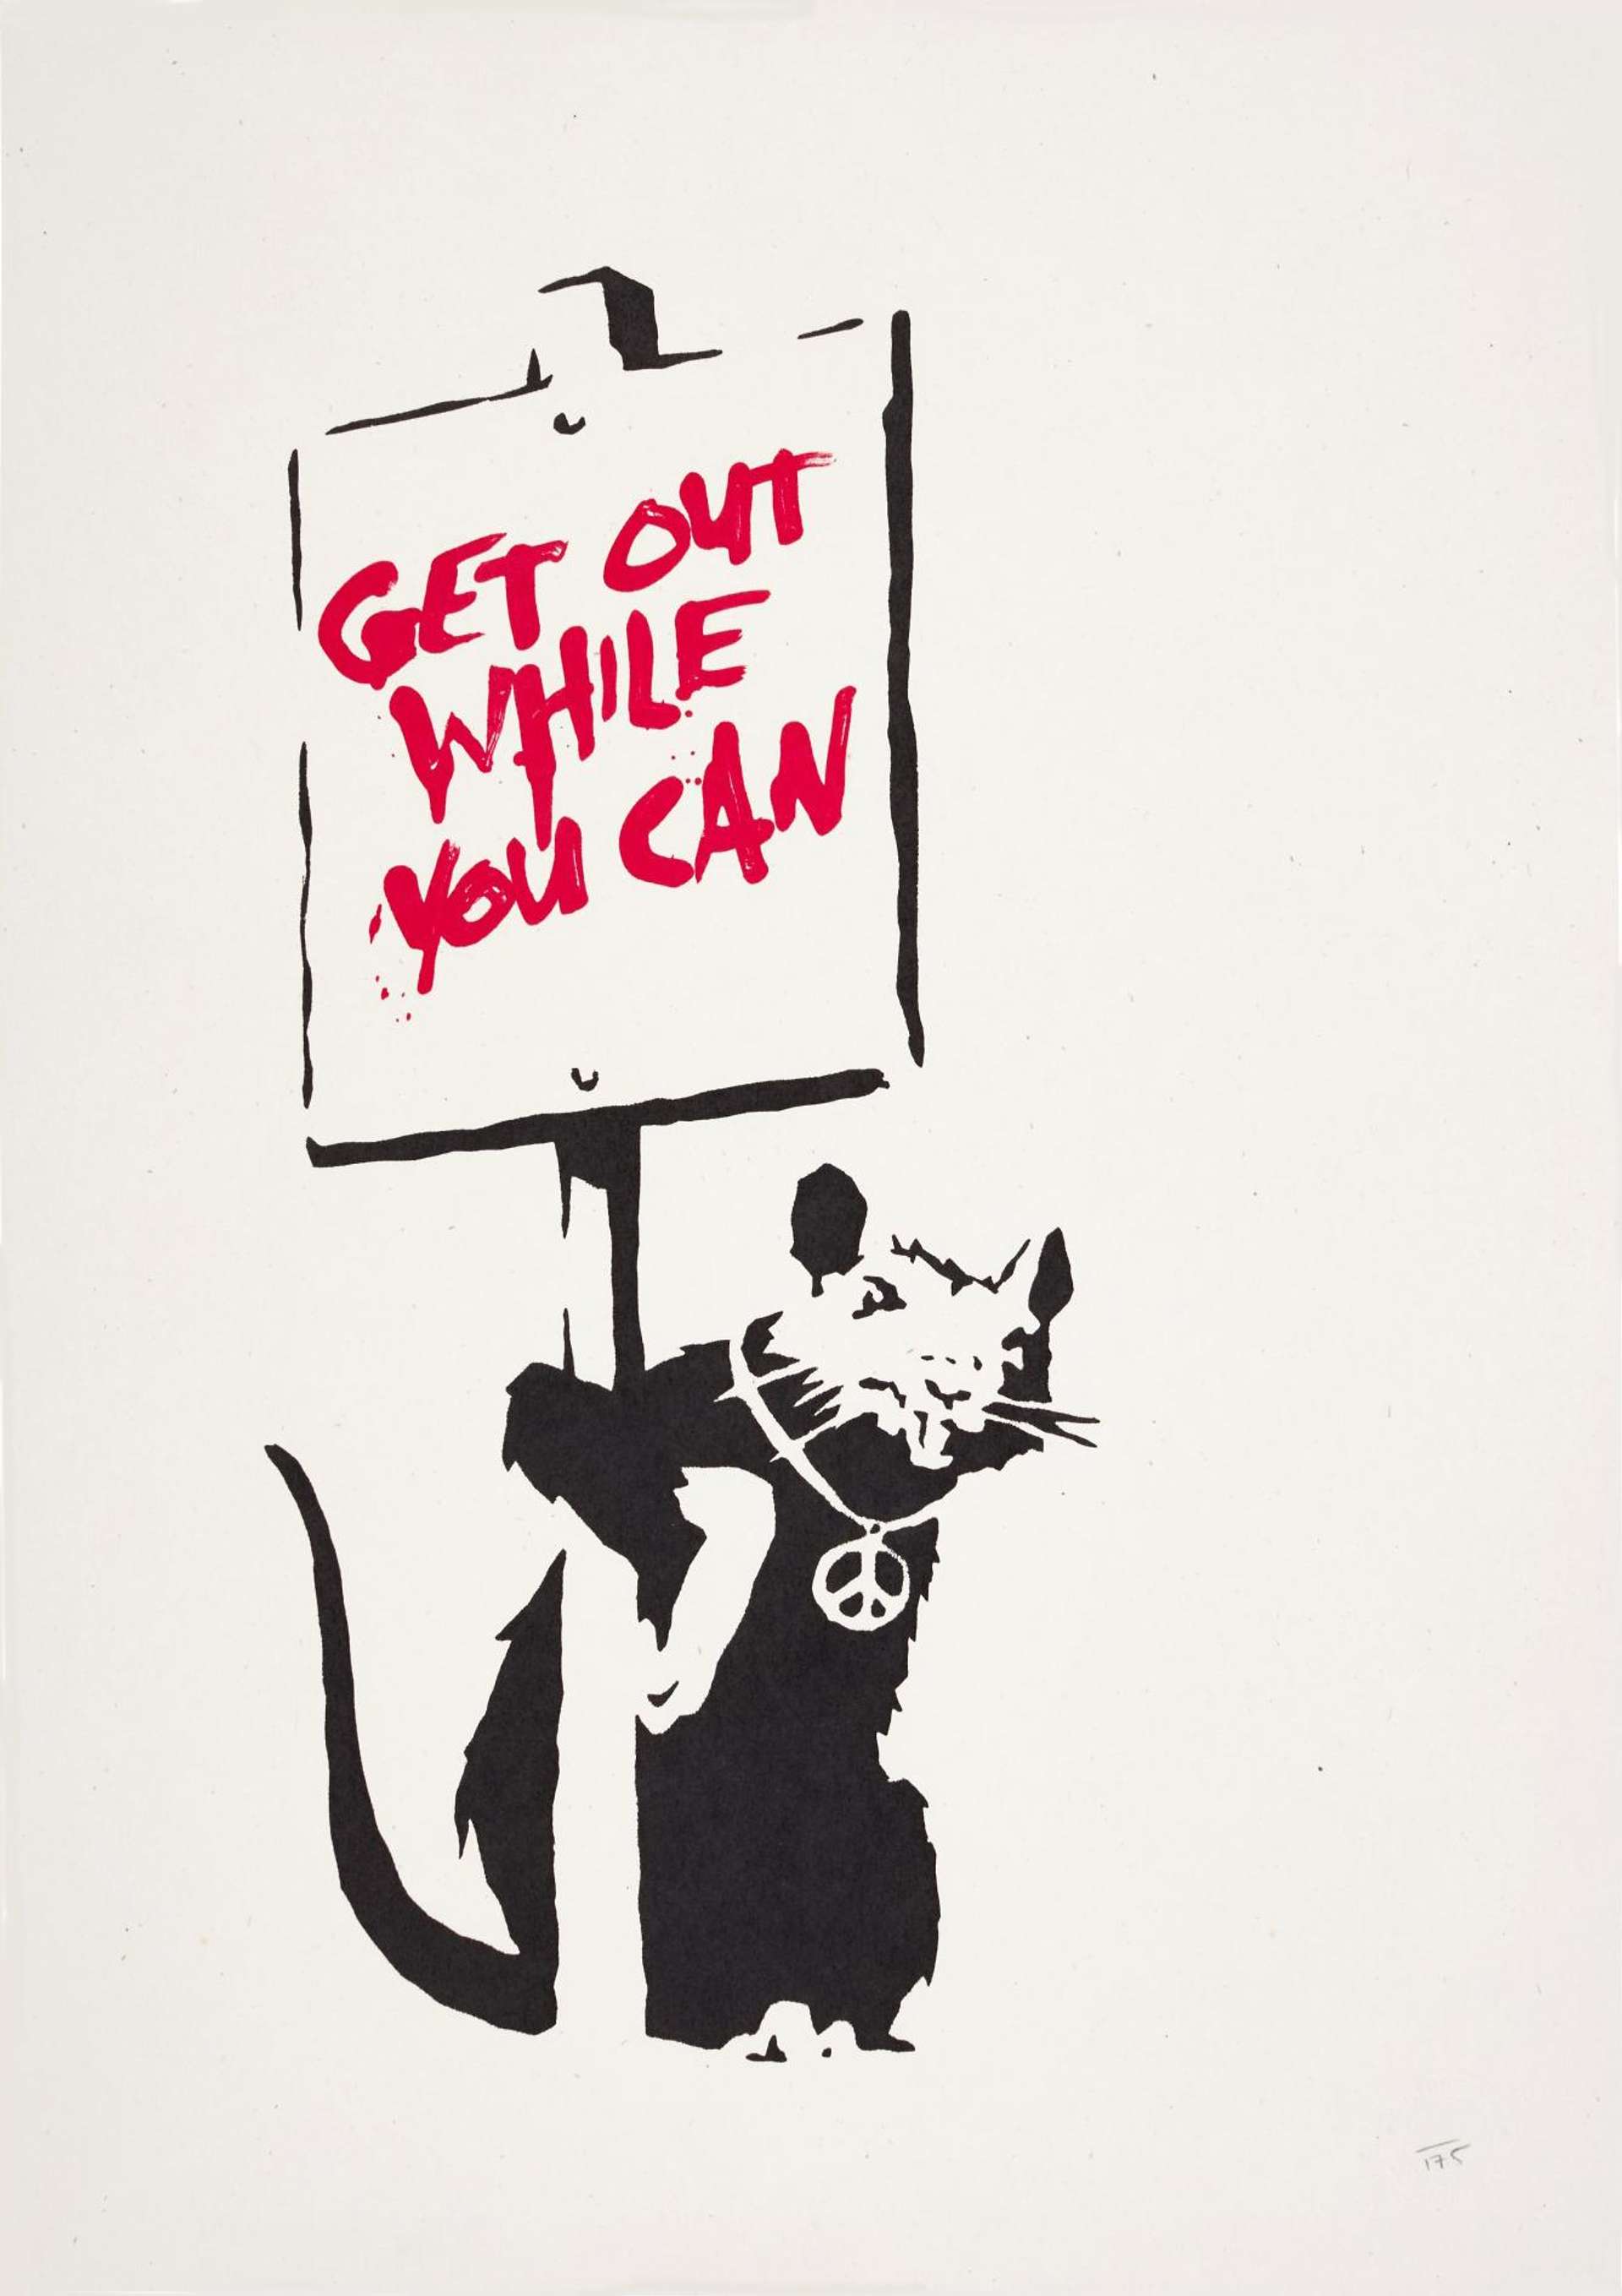 Get Out While You Can by Banksy